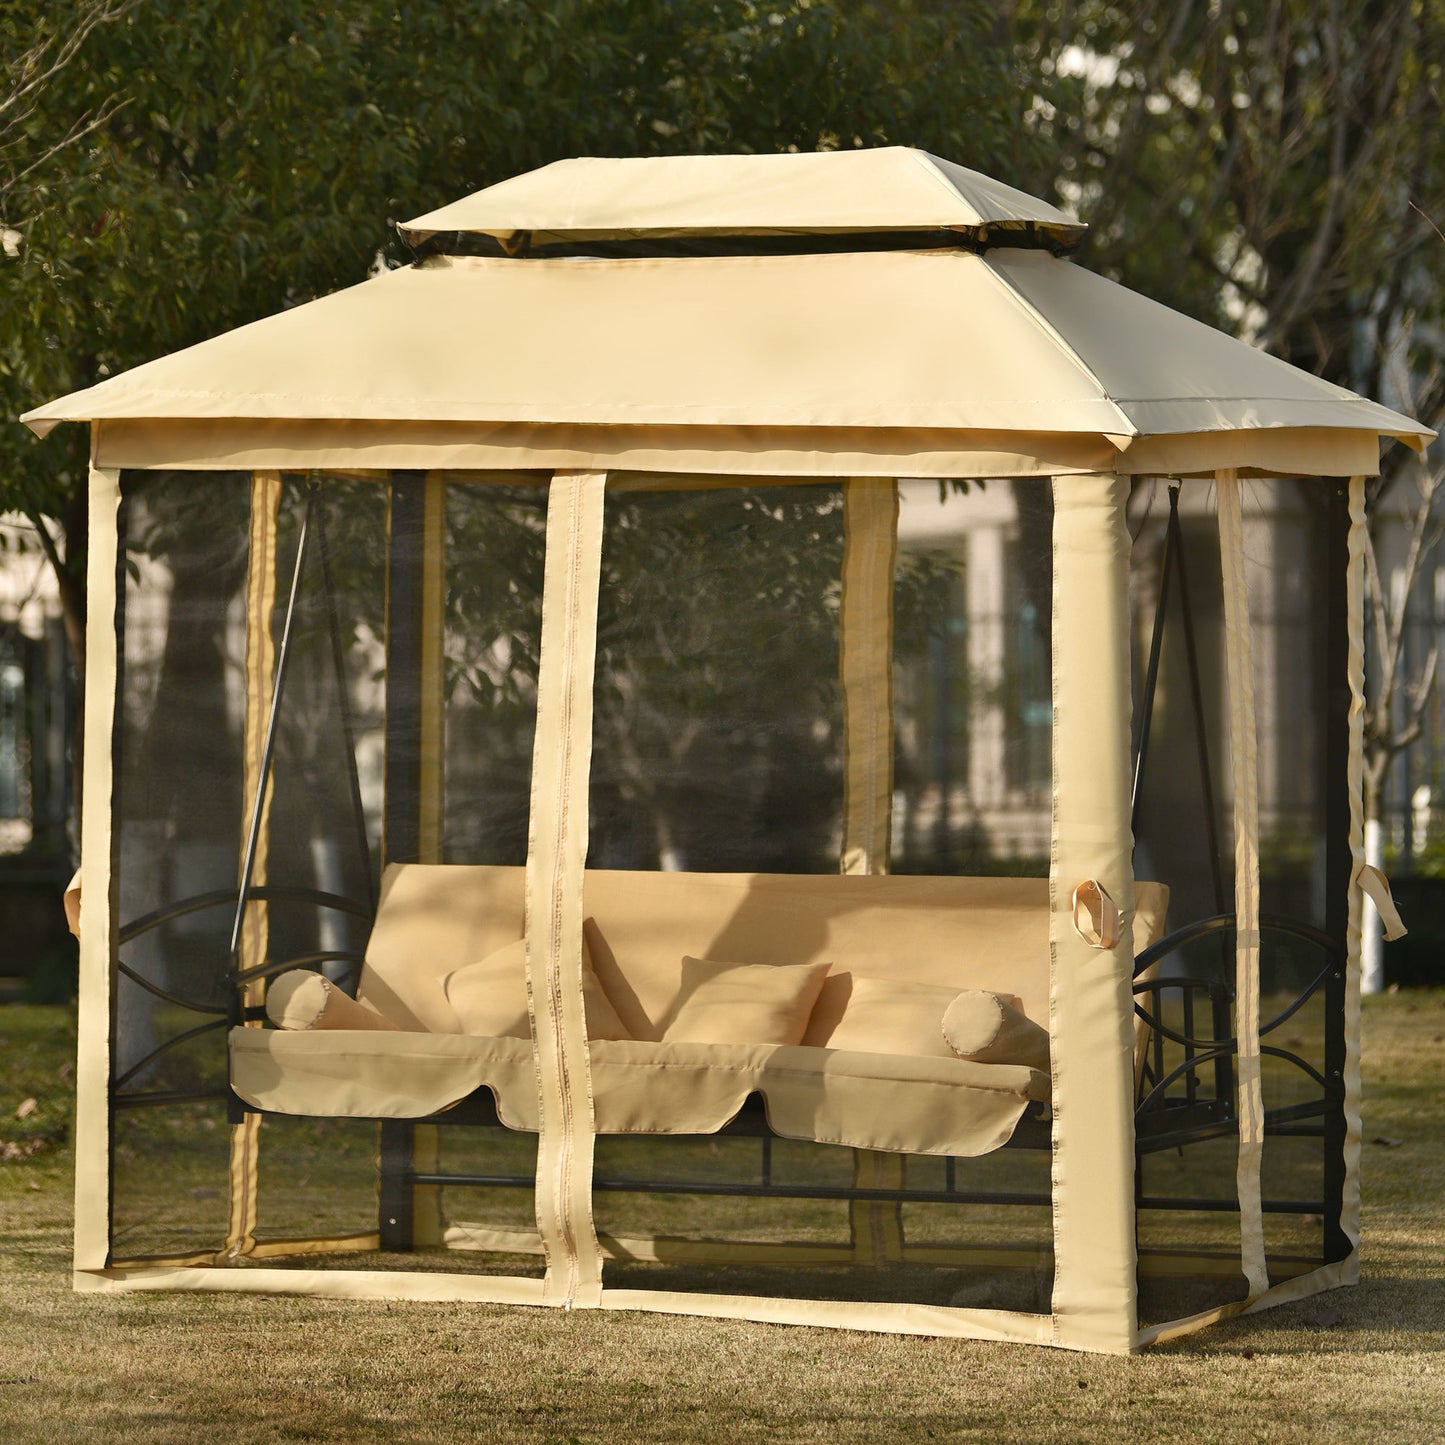 [VIDEO provided] U_STYLE 8.9 Ft. W x 5.9 Ft. D Outdoor Gazebo with Convertible Swing Bench, Double Roof Soft Canopy Garden Backyard Gazebo with Mosquito Netting Suitable for Lawn, Garden, Backyard